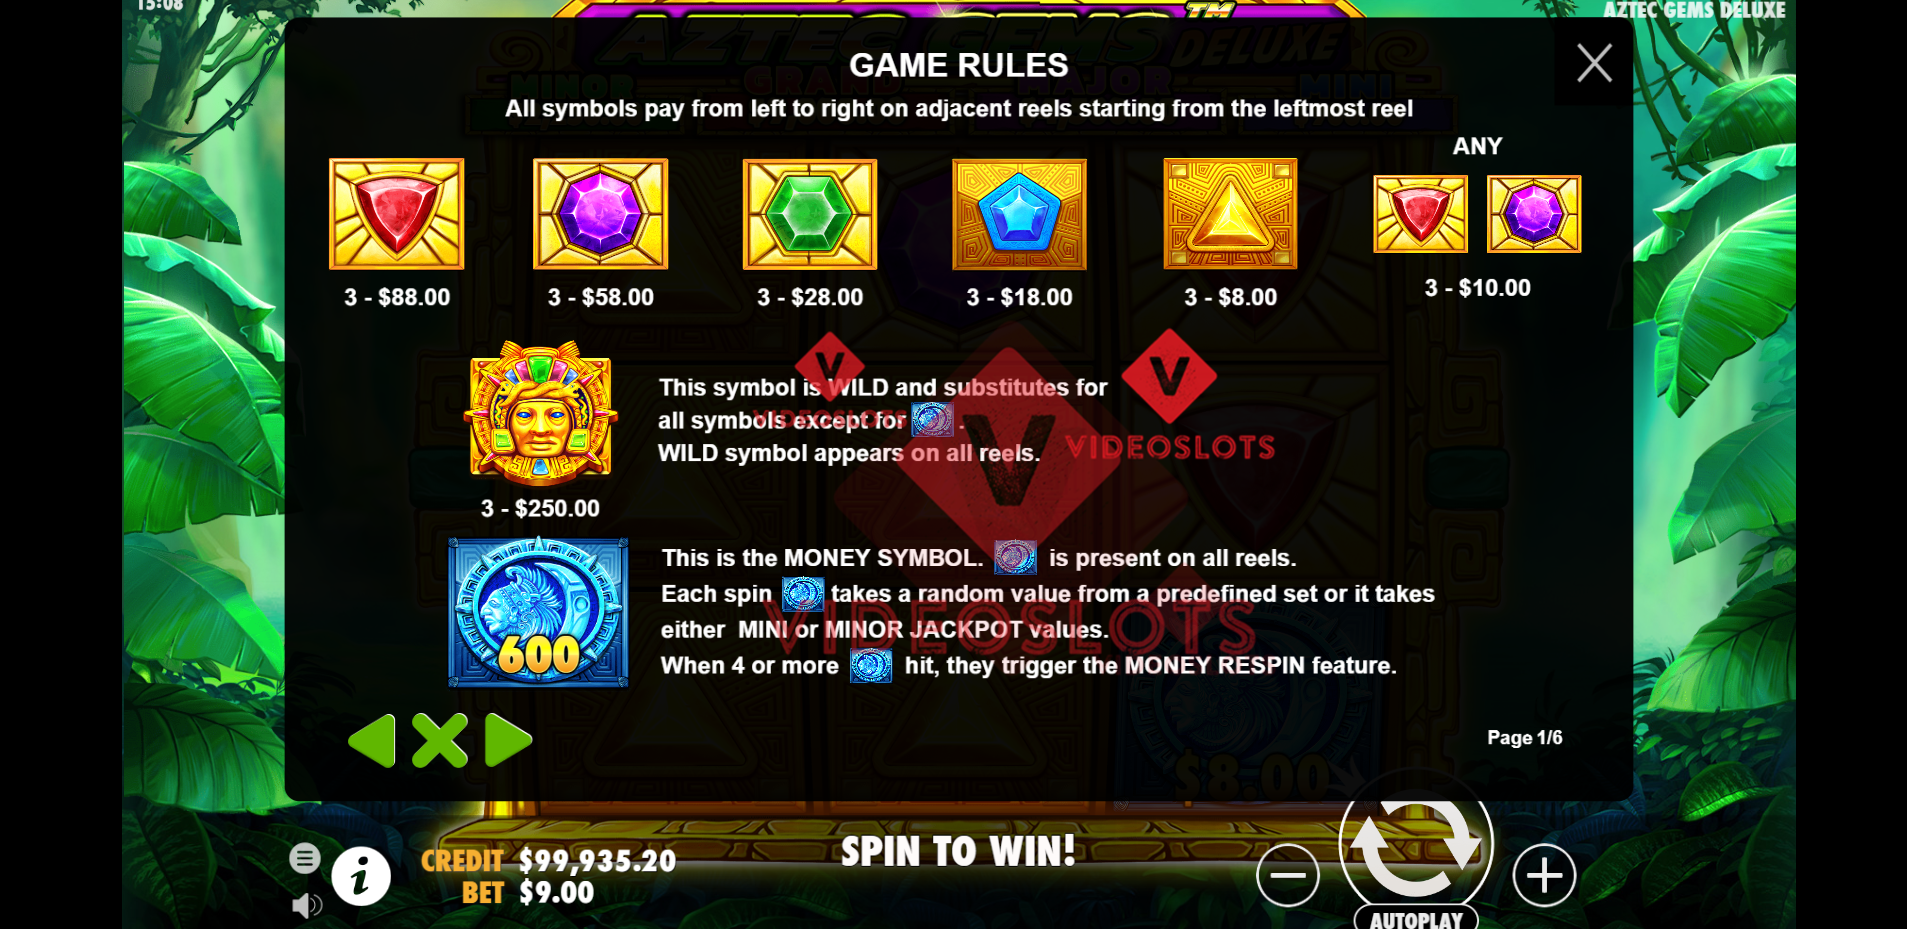 Pay Table for Aztec Gems Deluxe slot by Pragmatic Play